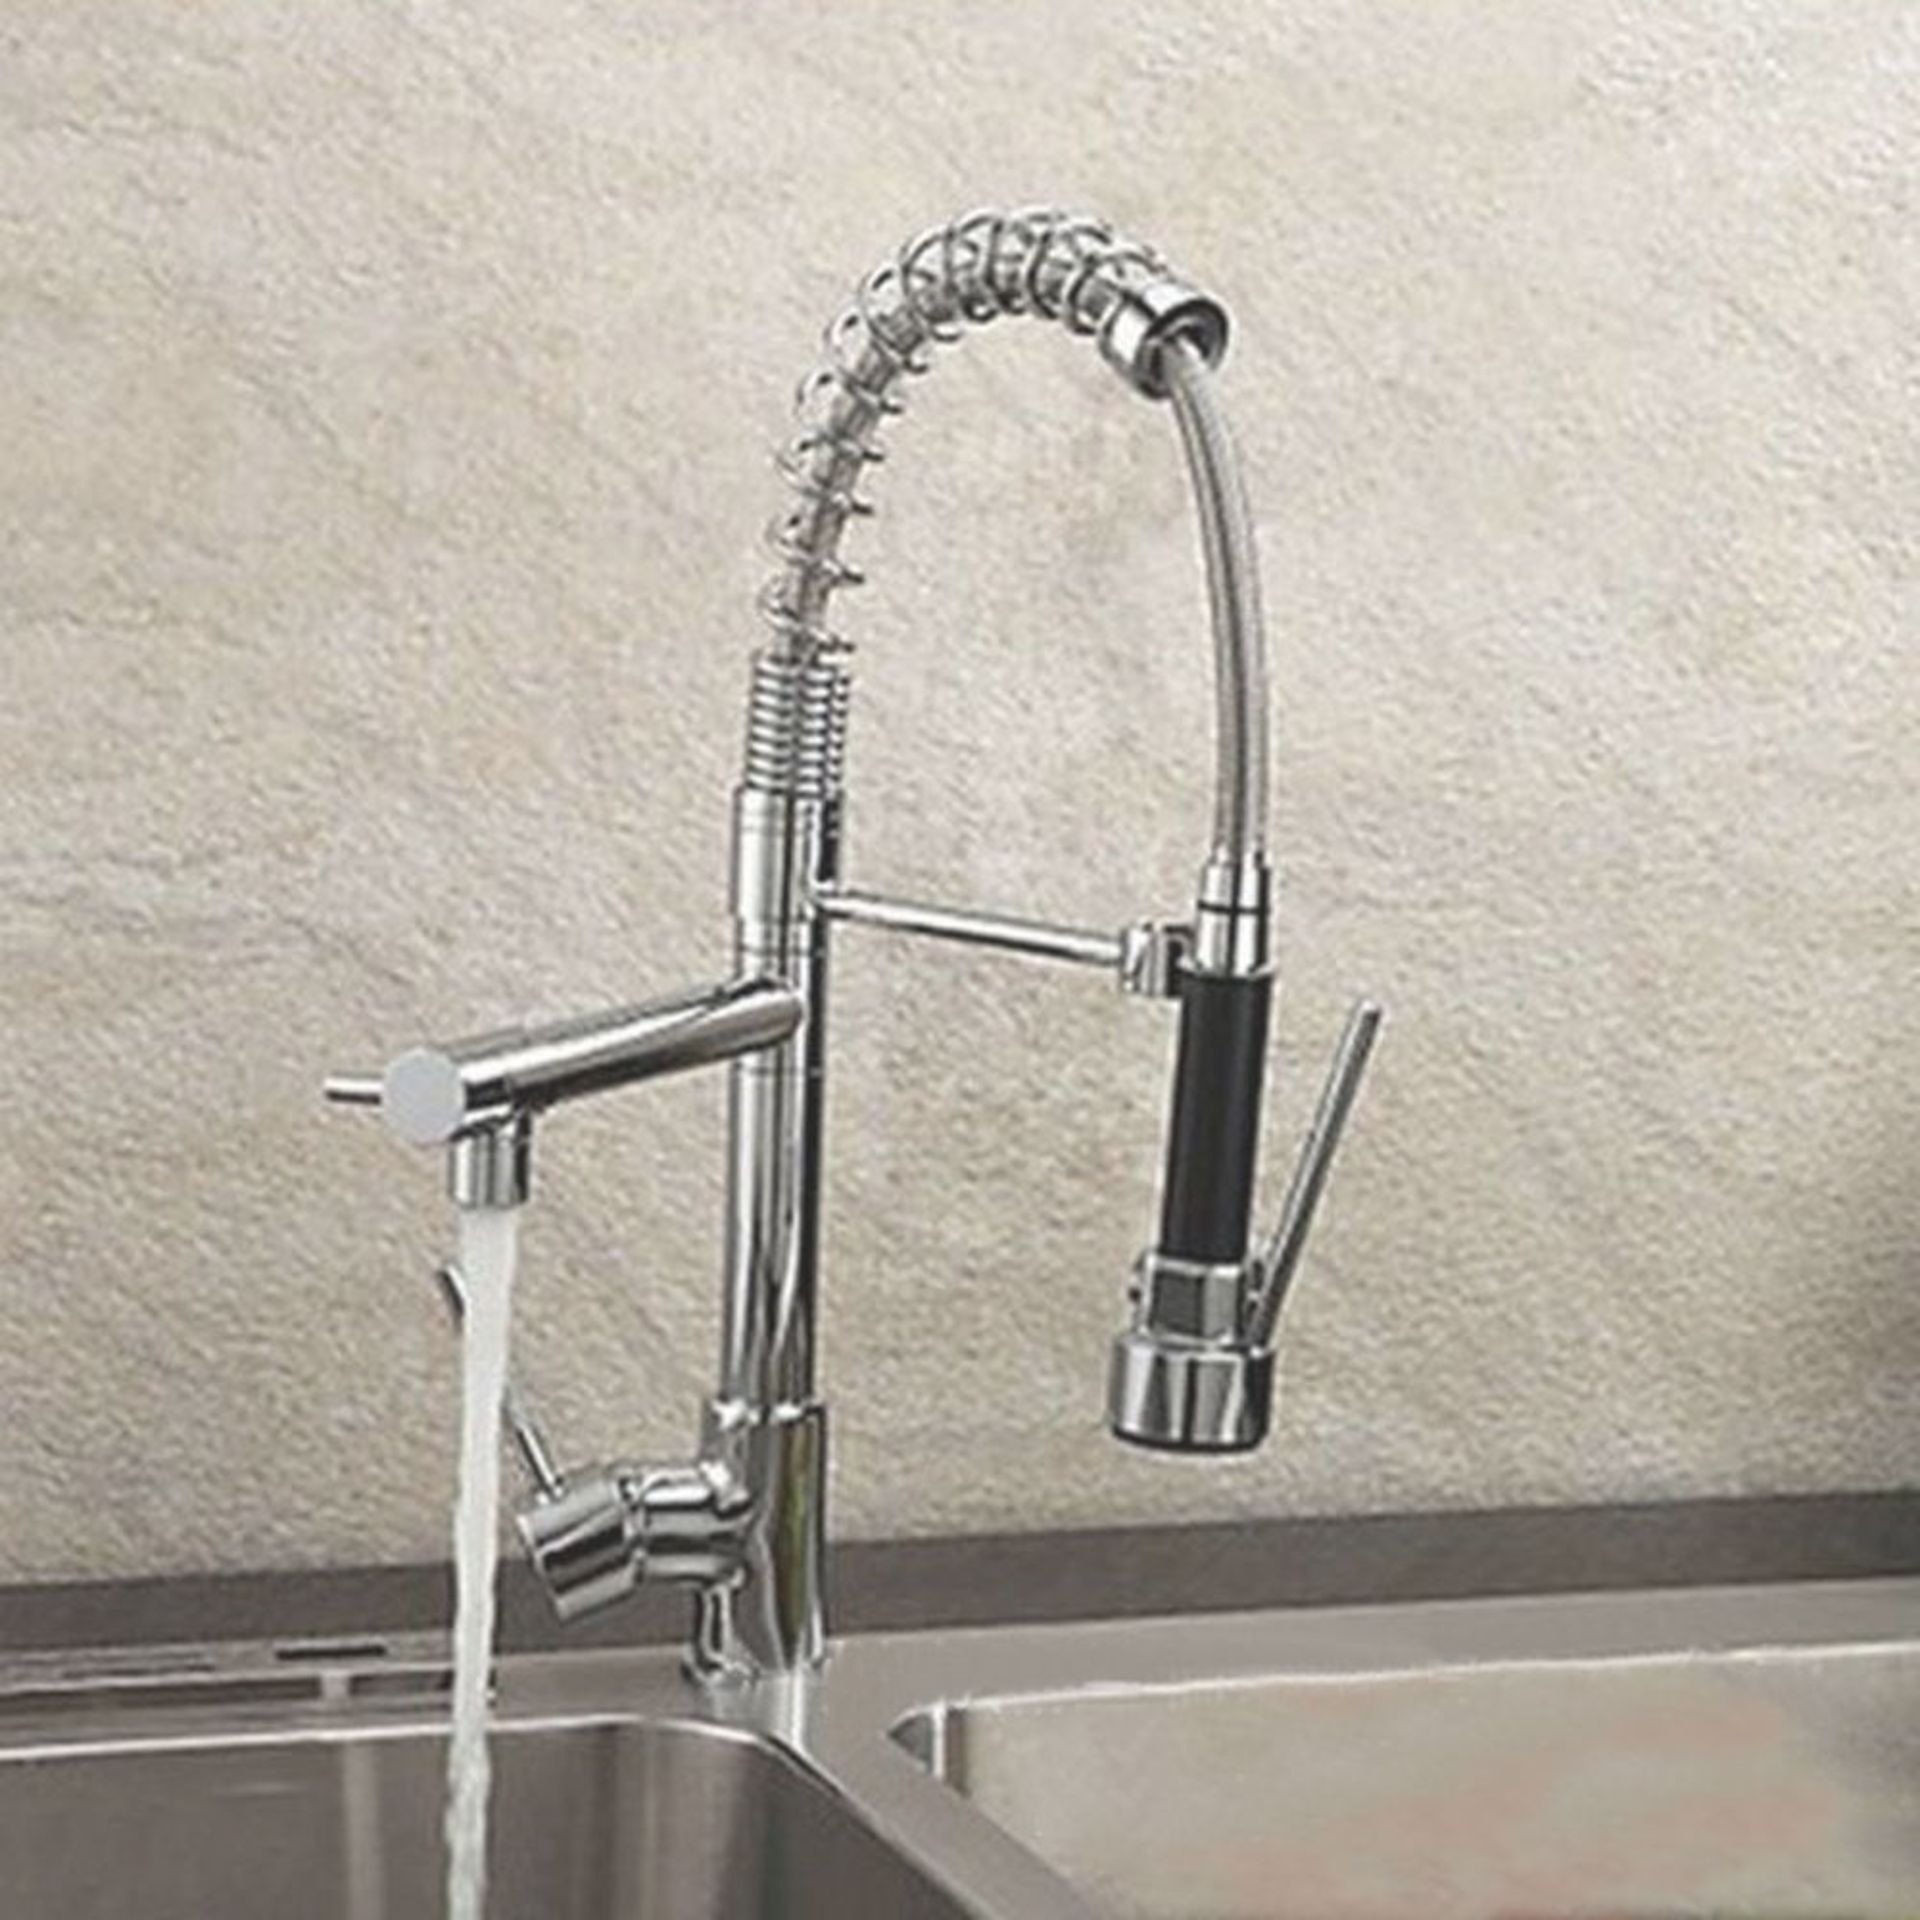 New & Boxed Bentley Modern Monobloc Chrome Brass Pull Out Spray Mixer Tap. RRP £349.99.This